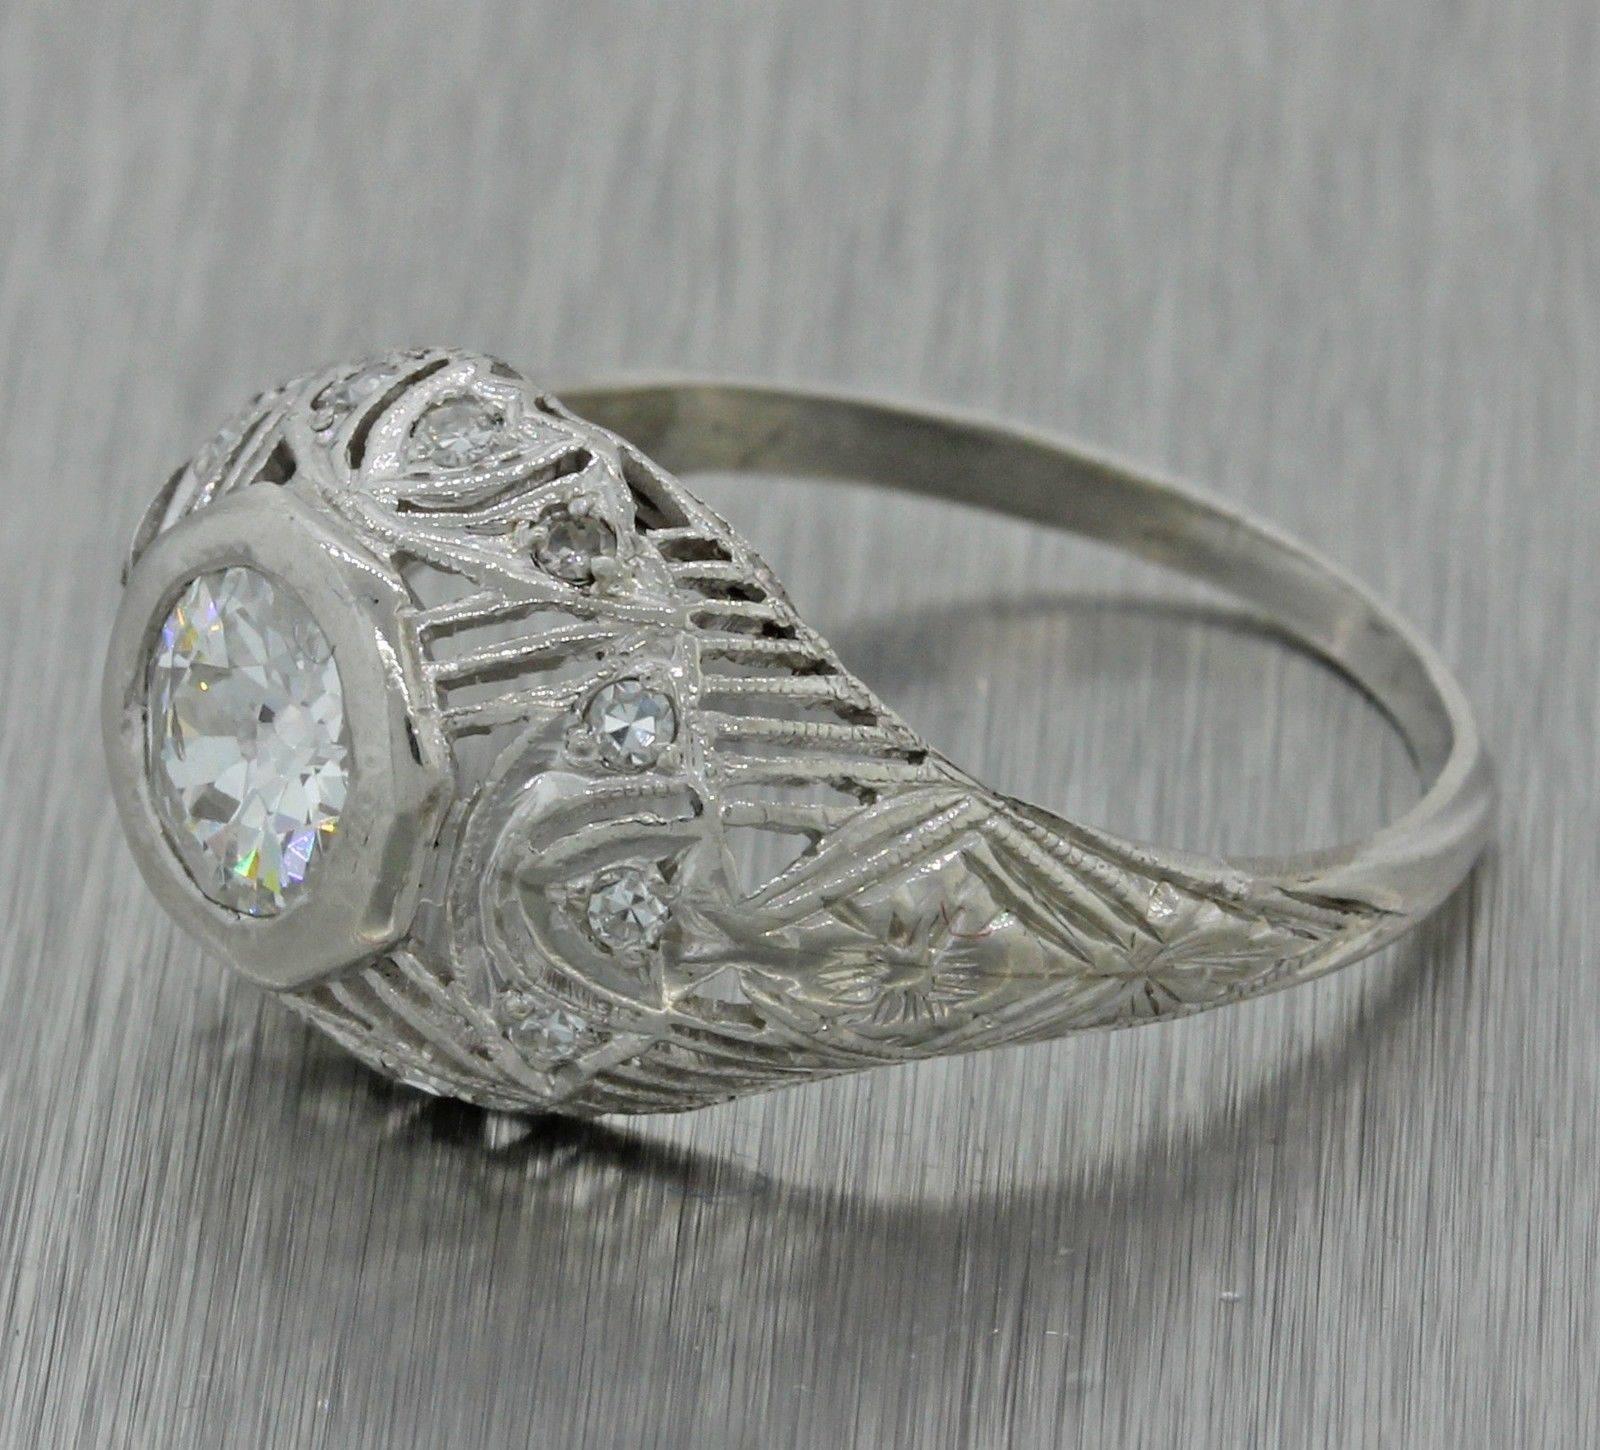 This is a 1920s Antique Art Deco Platinum .73ctw Old Cut Diamond Dome Engagement Ring EGL. This ring suggested retail price is $3,480 USD. It will come in a lovely ring box for a perfect presentation and our unconditional 30 day money back return